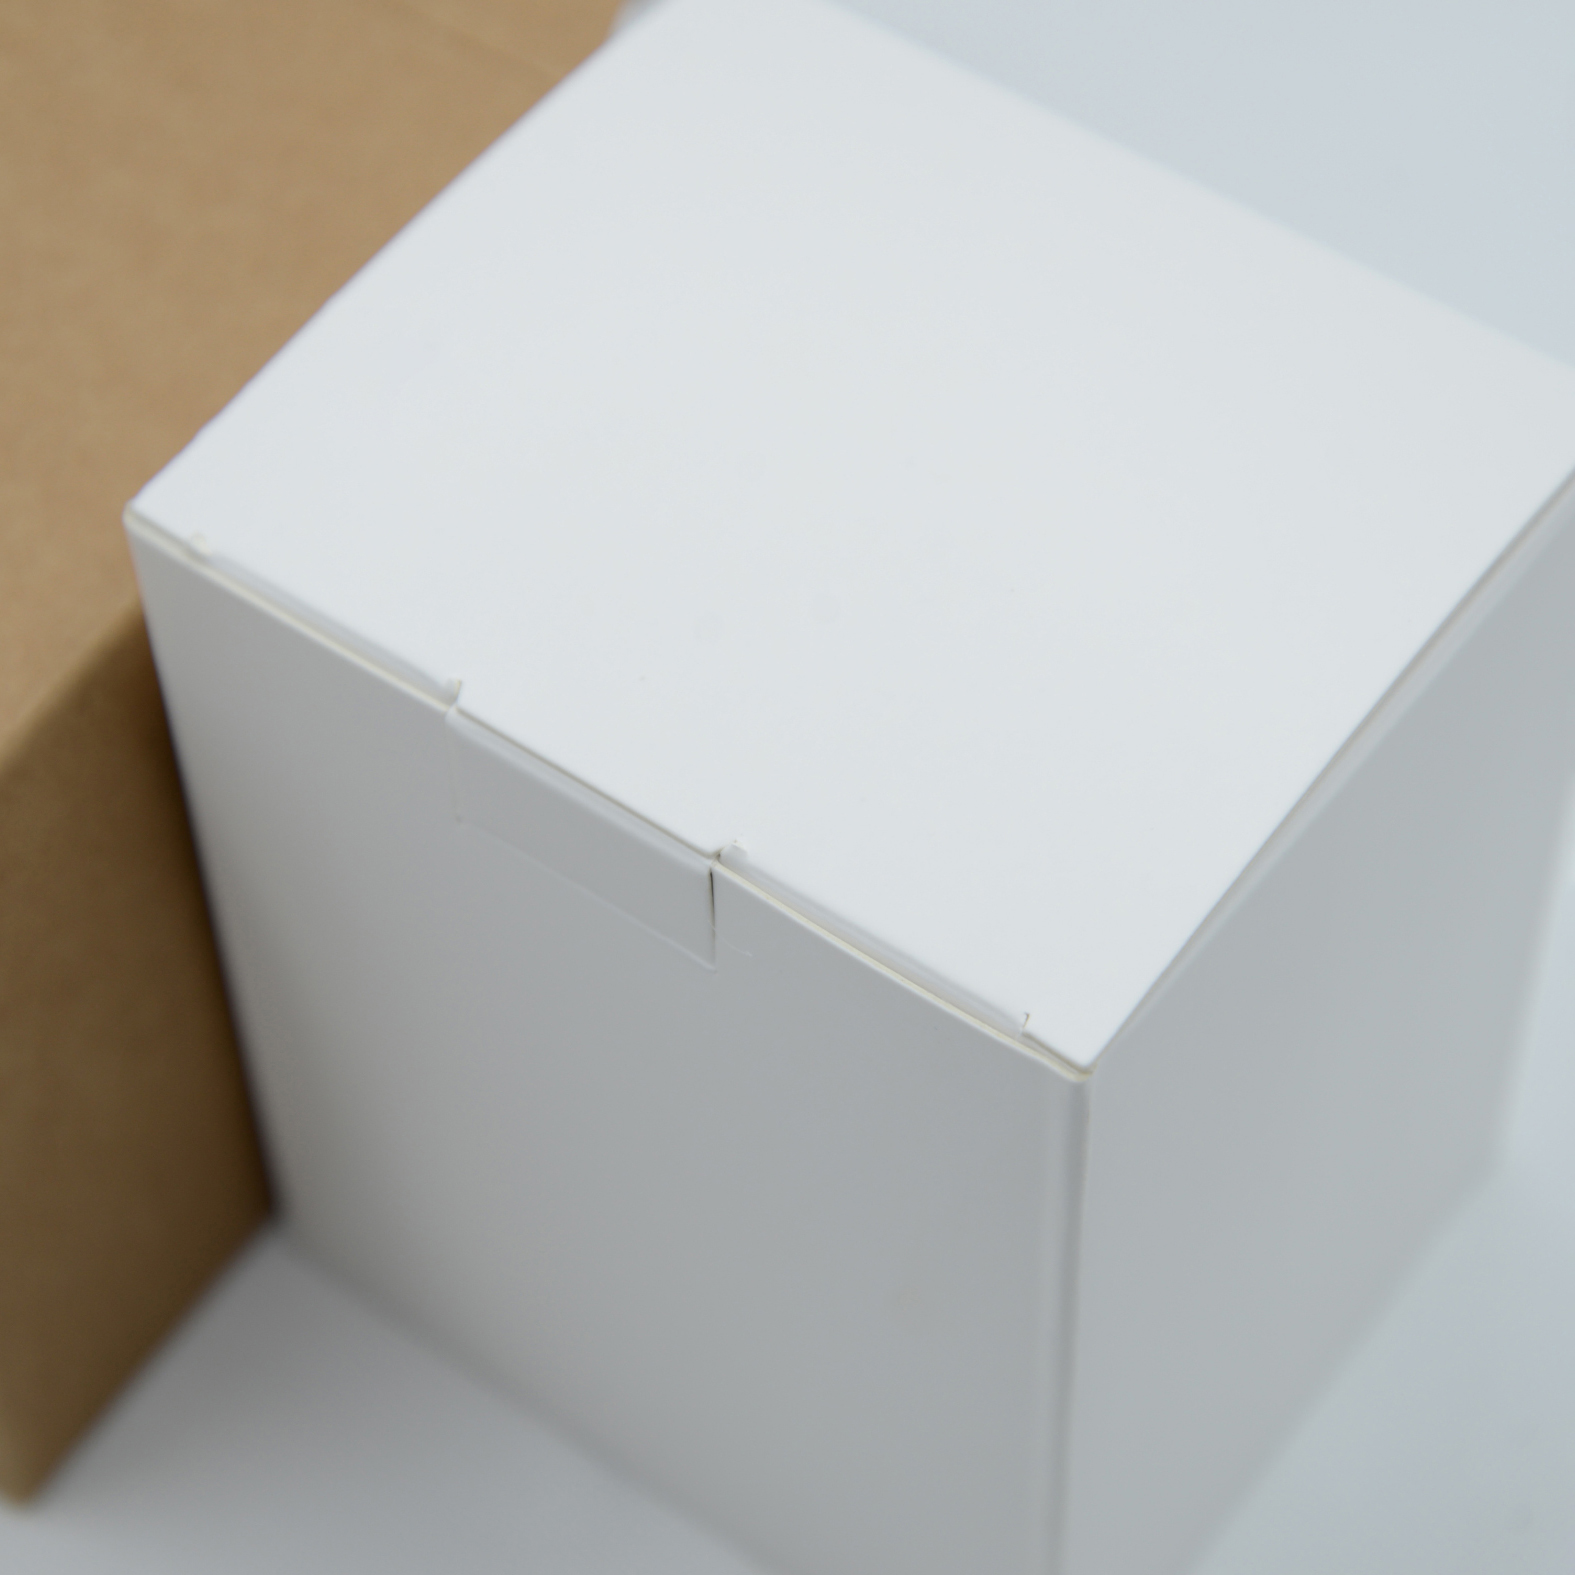 Craft paper box paper cardboard packaging for hanging ear outer box